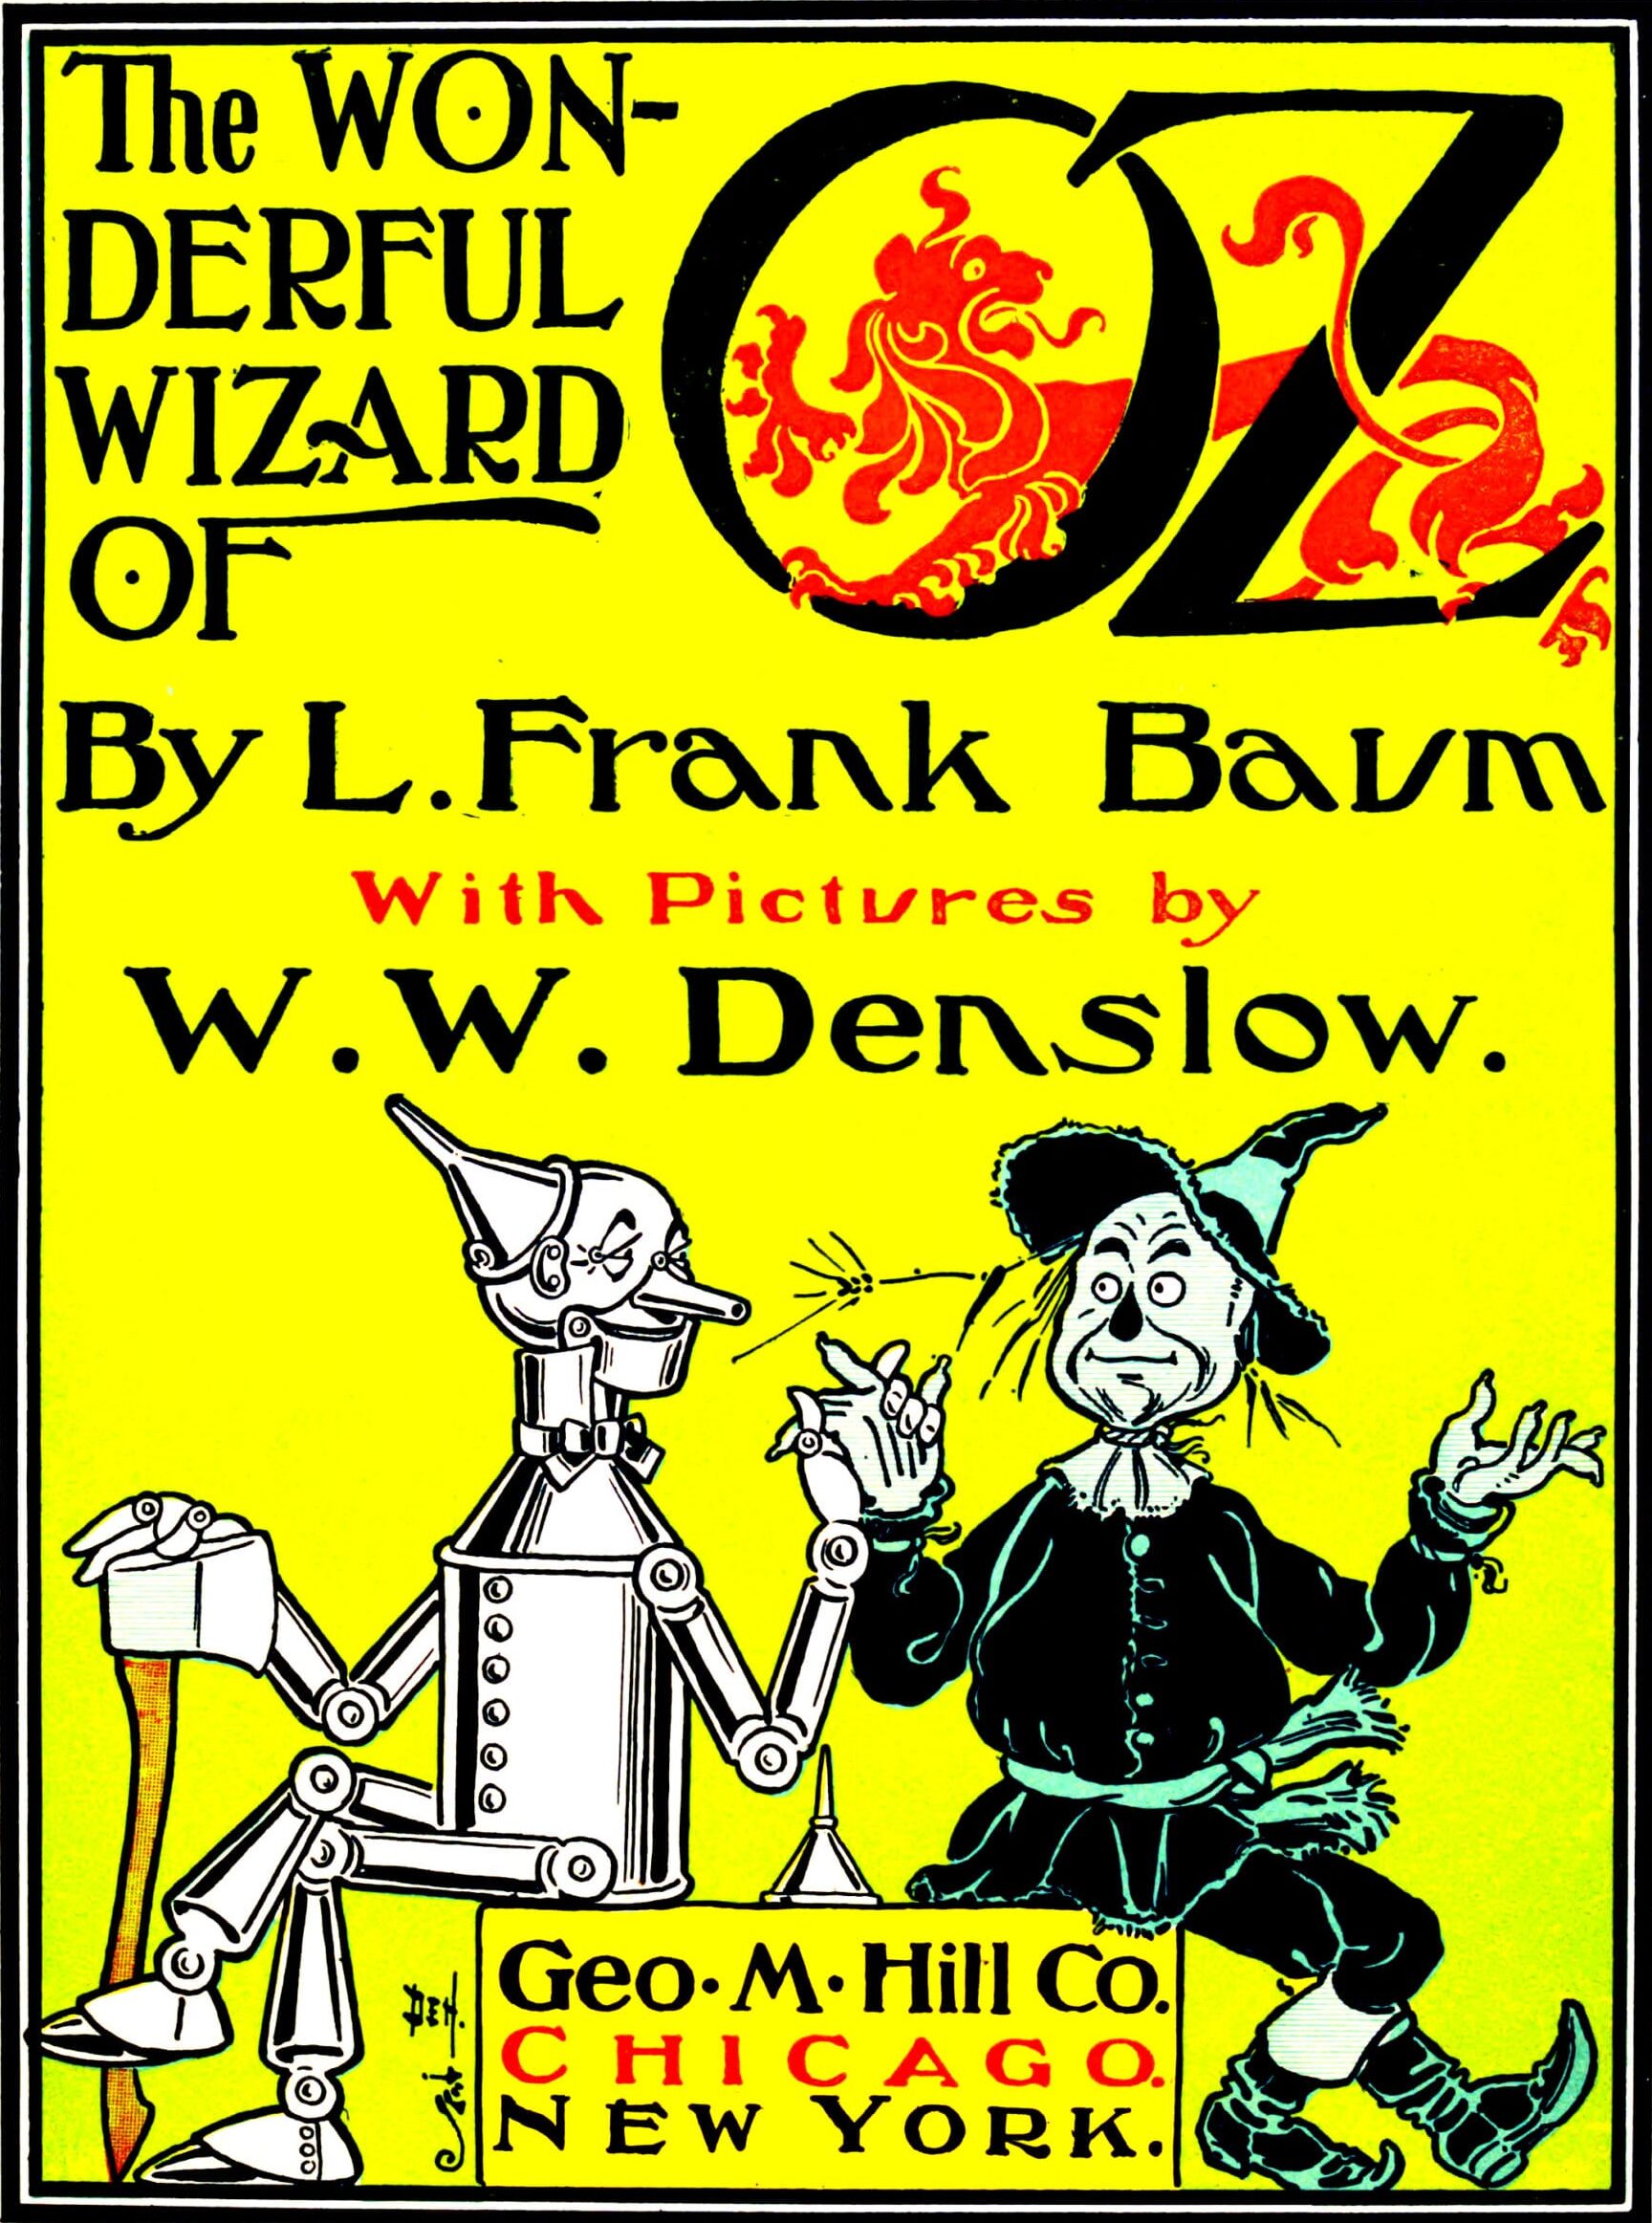 This Book is Banned_The Wonderful Wizard of Oz: They Even Banned Dorothy?!-endnotes